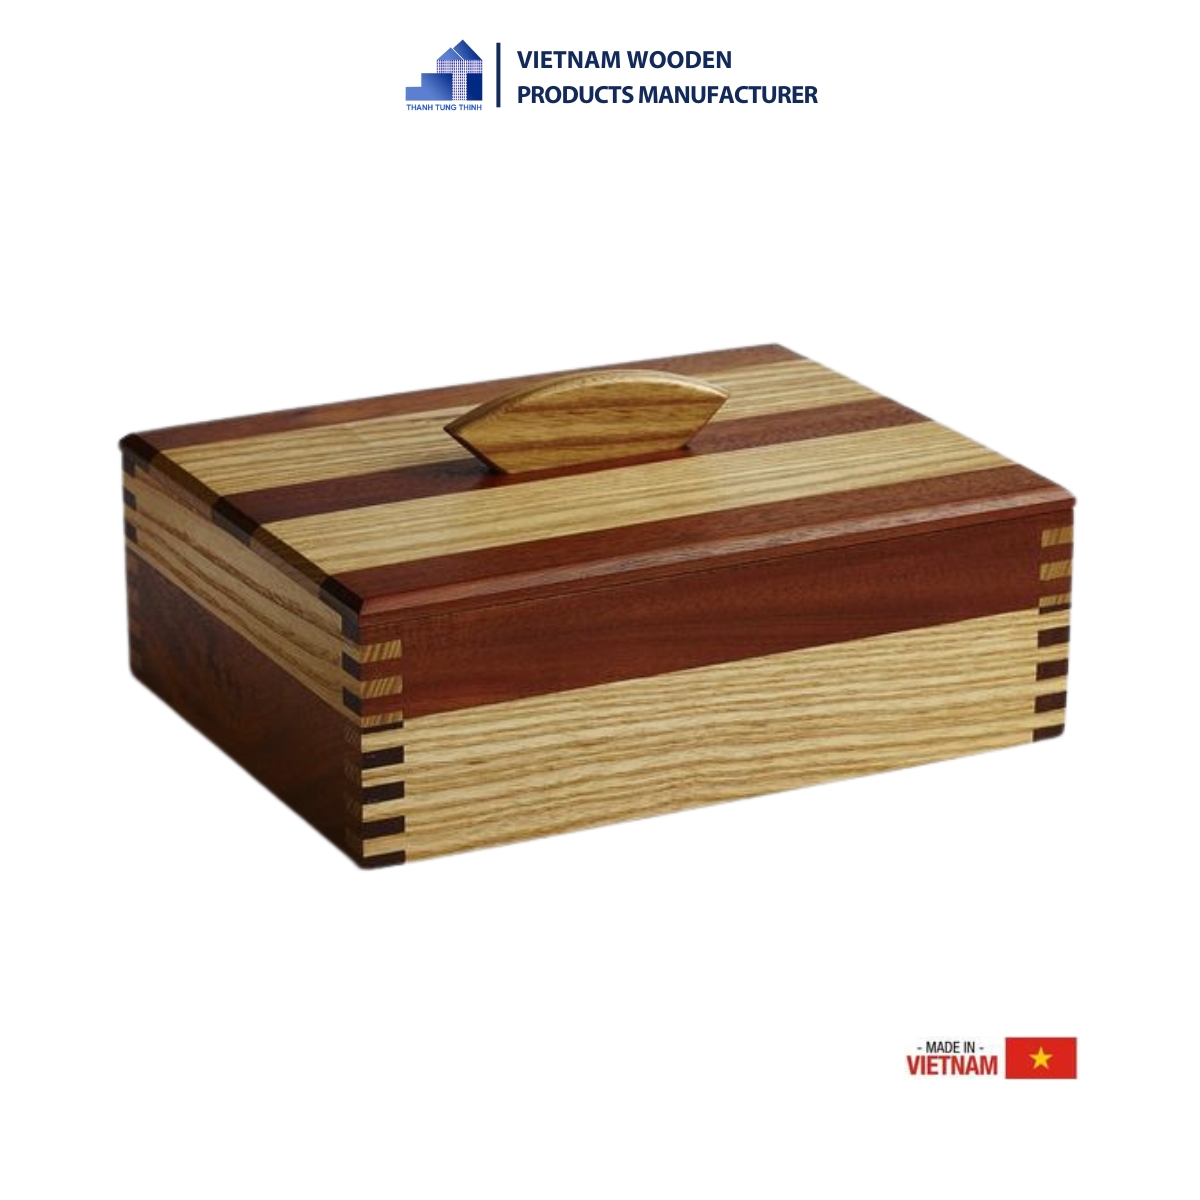 Wooden Customized Box with Elegant Handle [WCZB12]